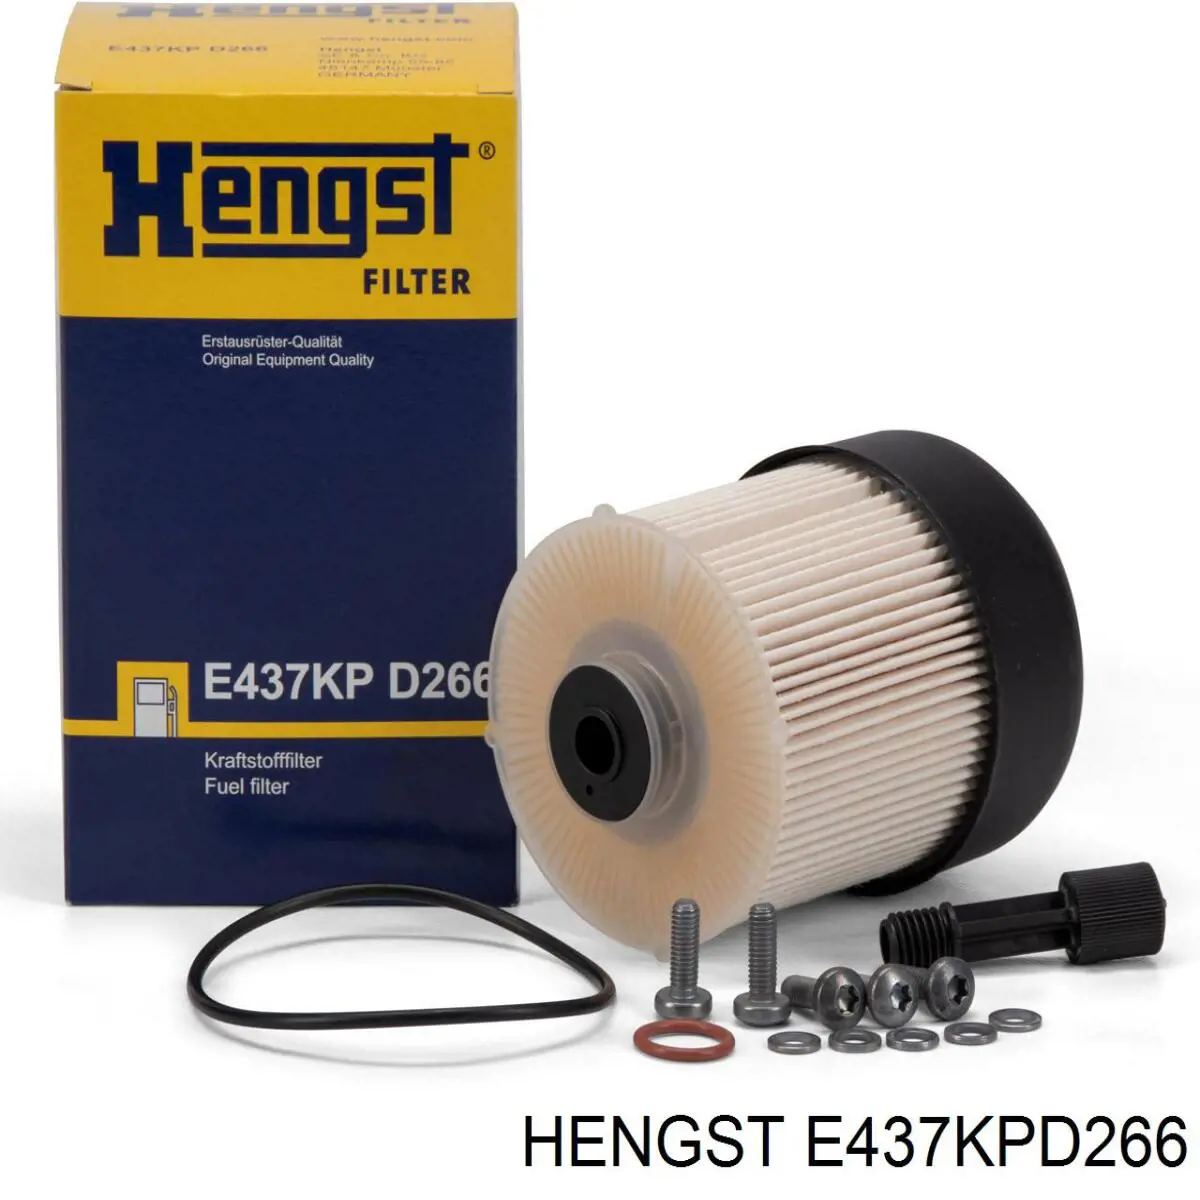 Filtro combustible E437KPD266 Hengst